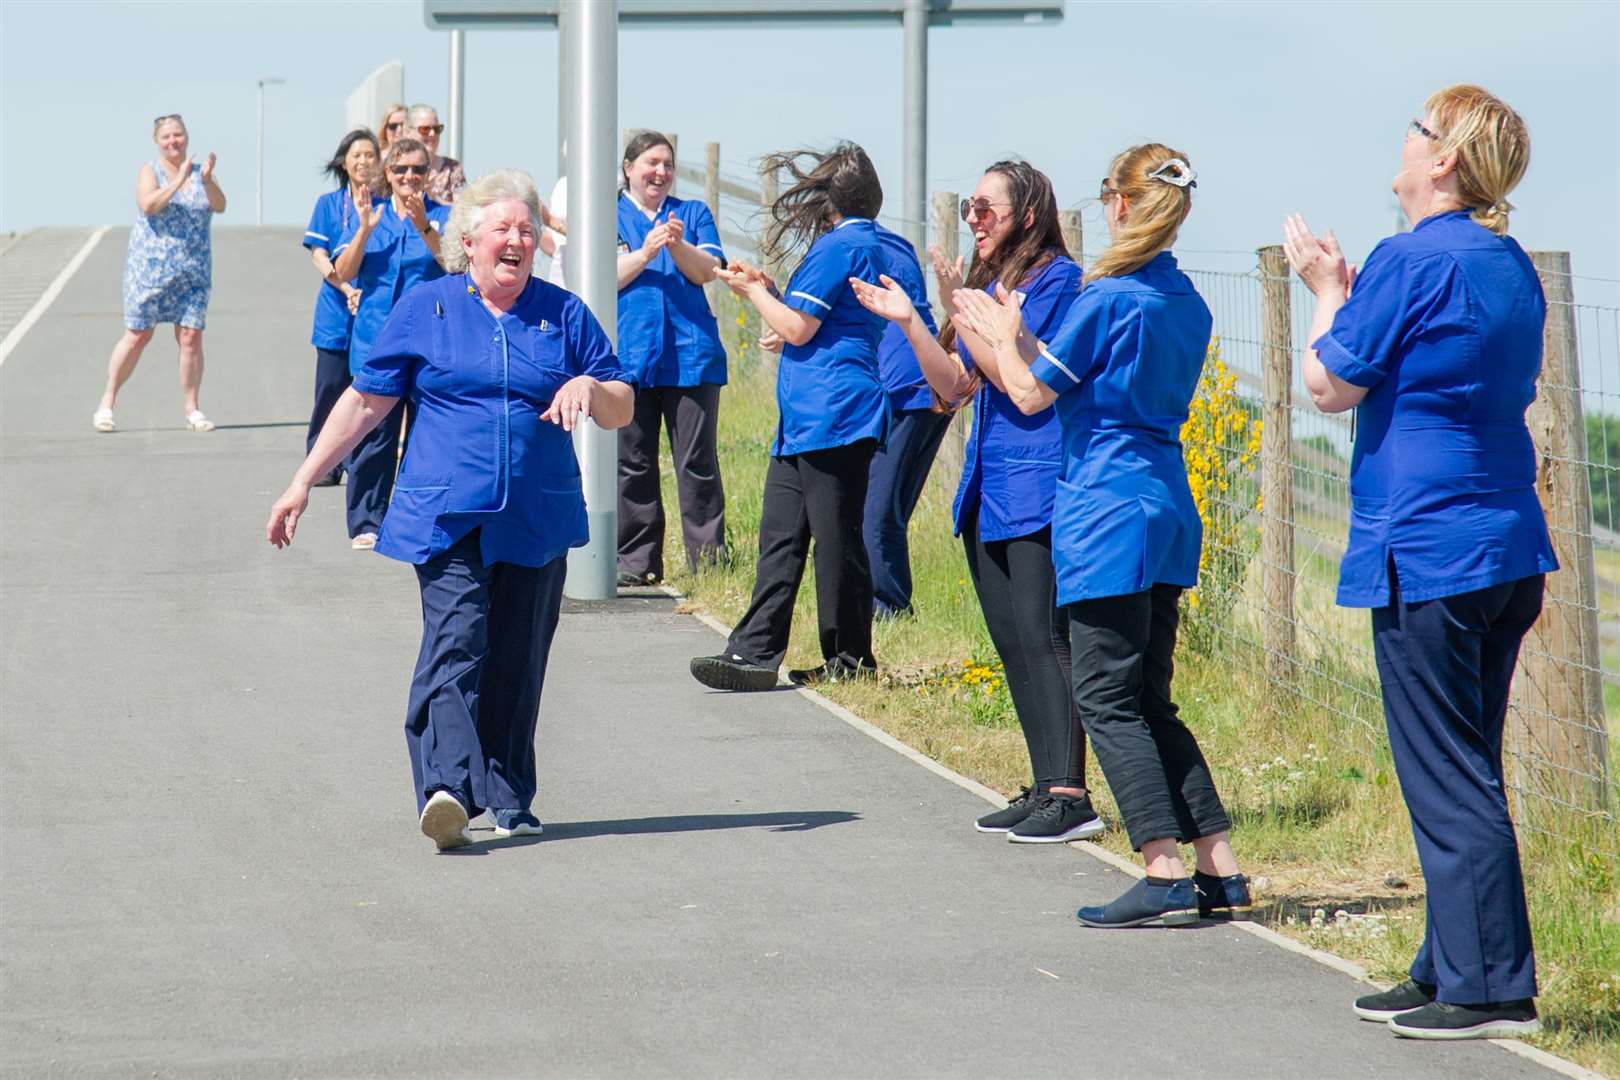 Forres carer Janette Smithies receives a clap from her colleagues on the Waterford bridge as she retires from her role of 15 years.